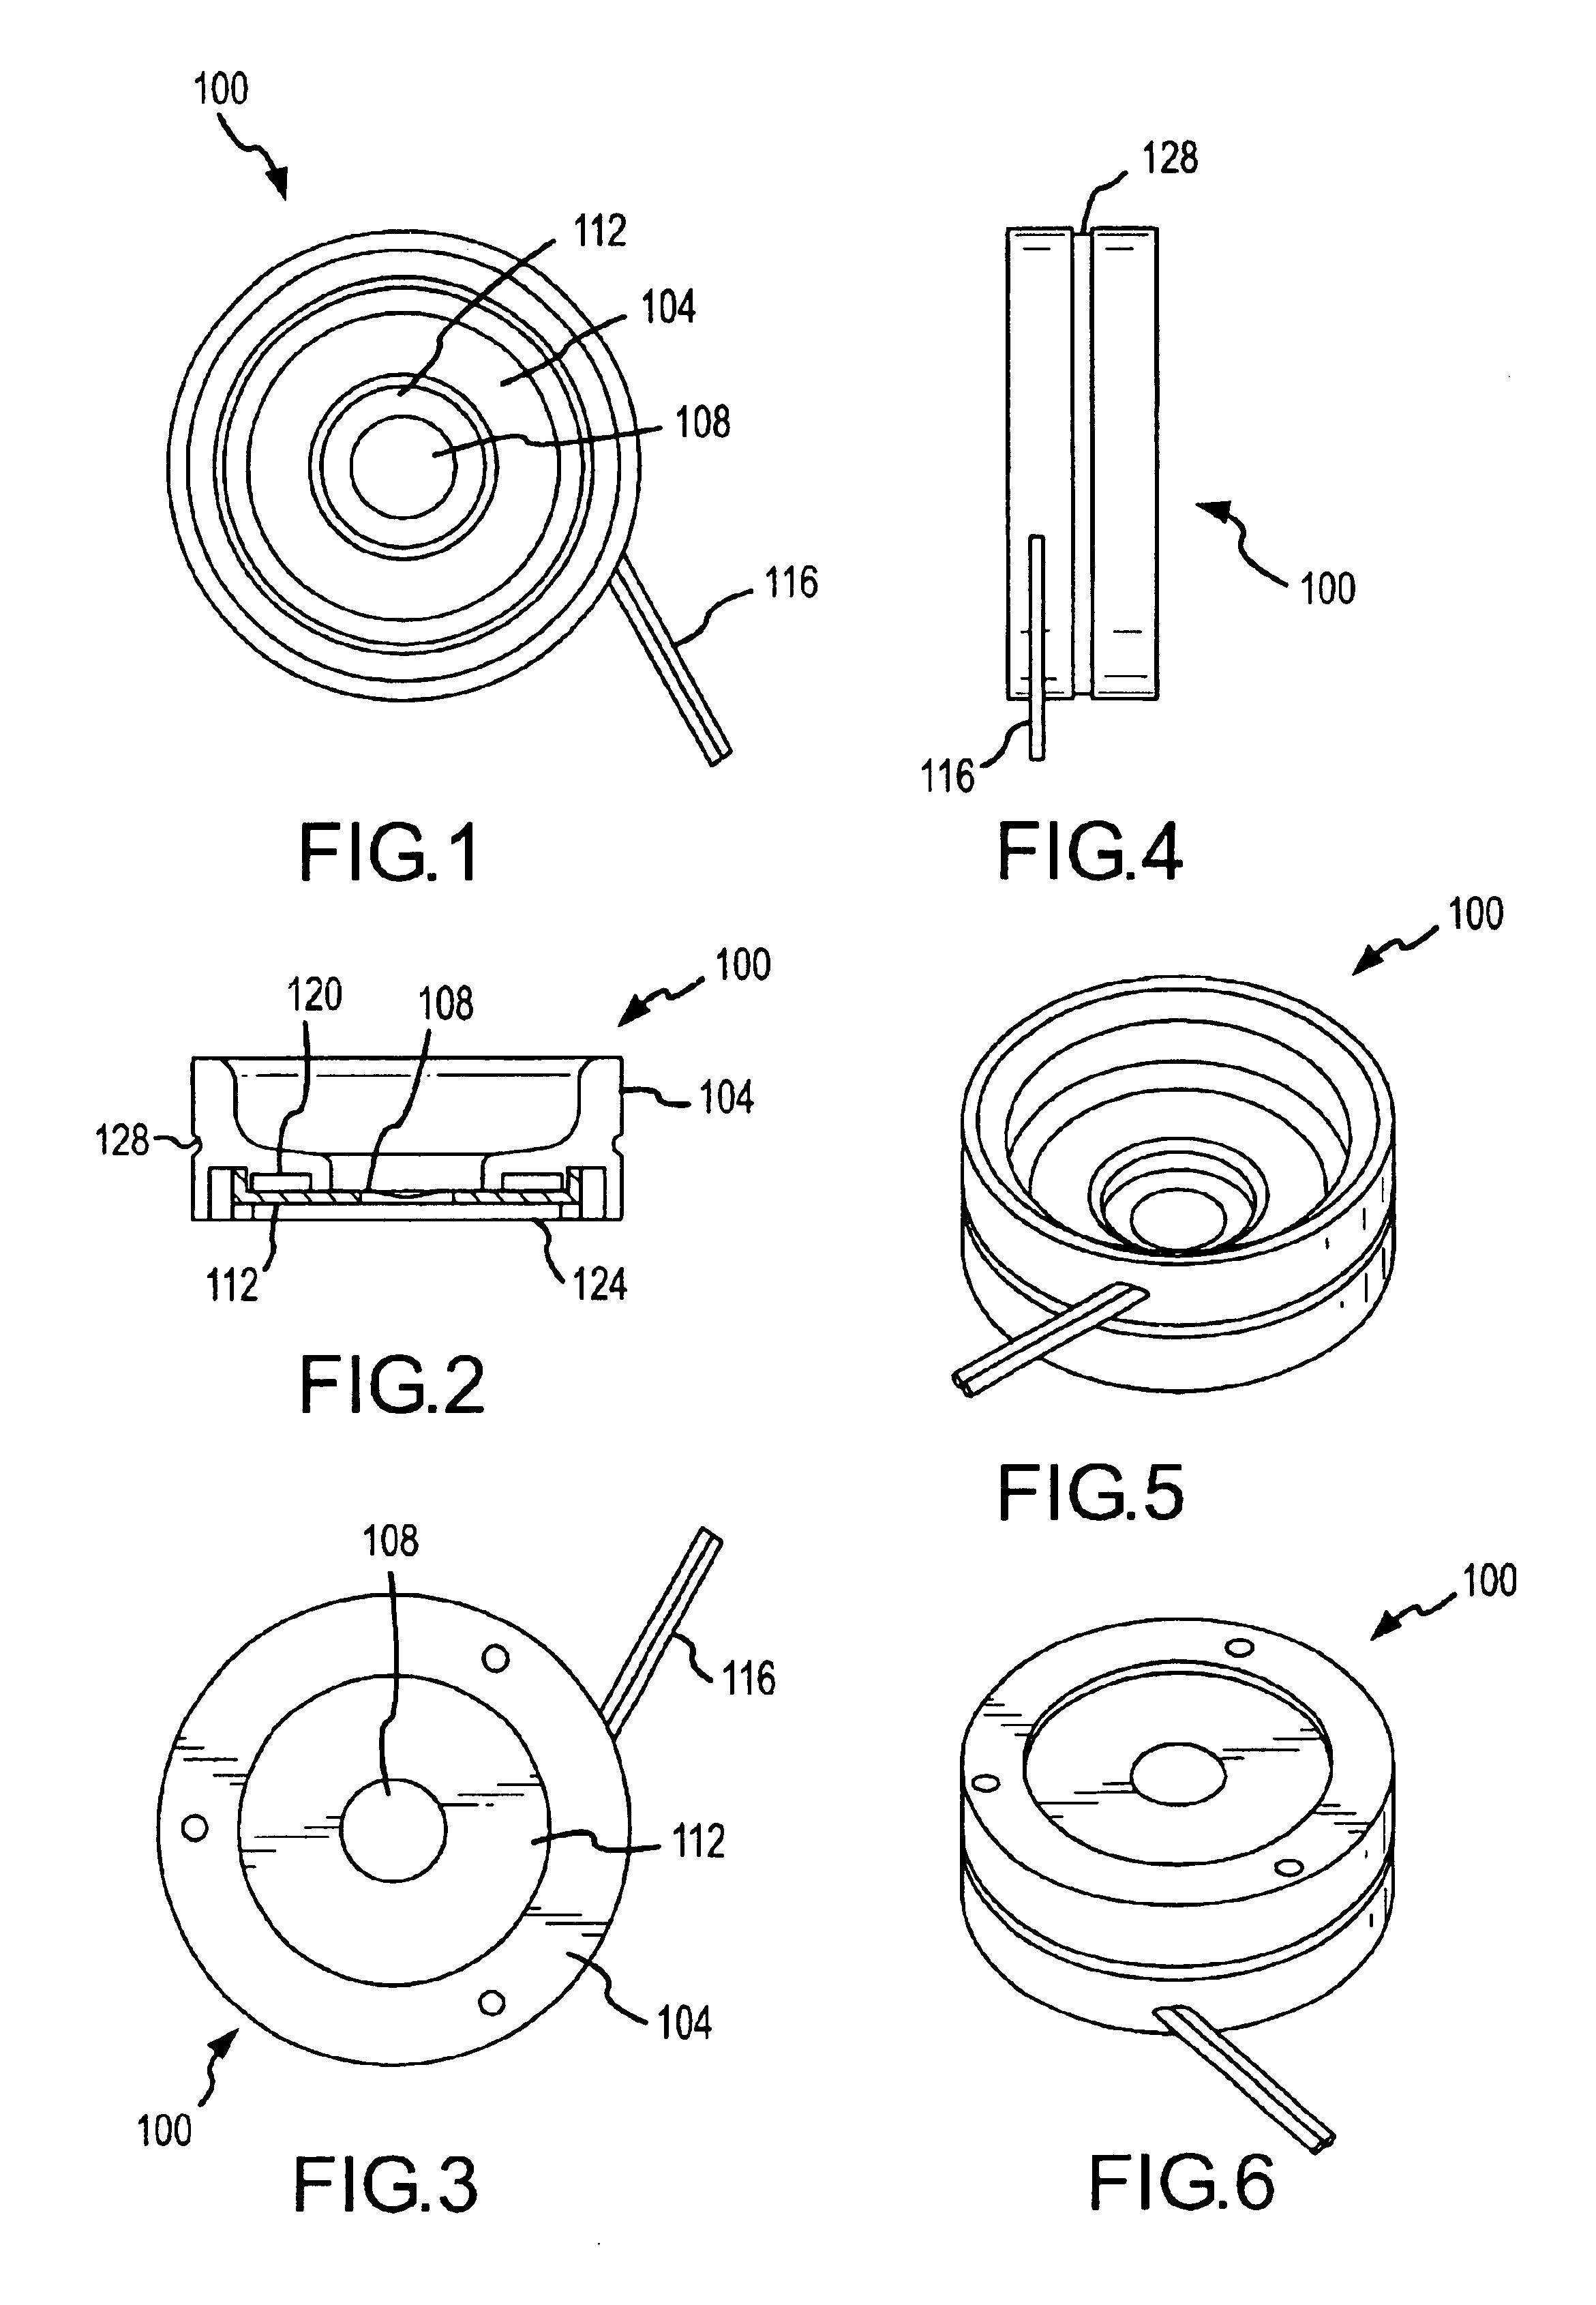 Apparatus for providing aerosol for medical treatment and methods